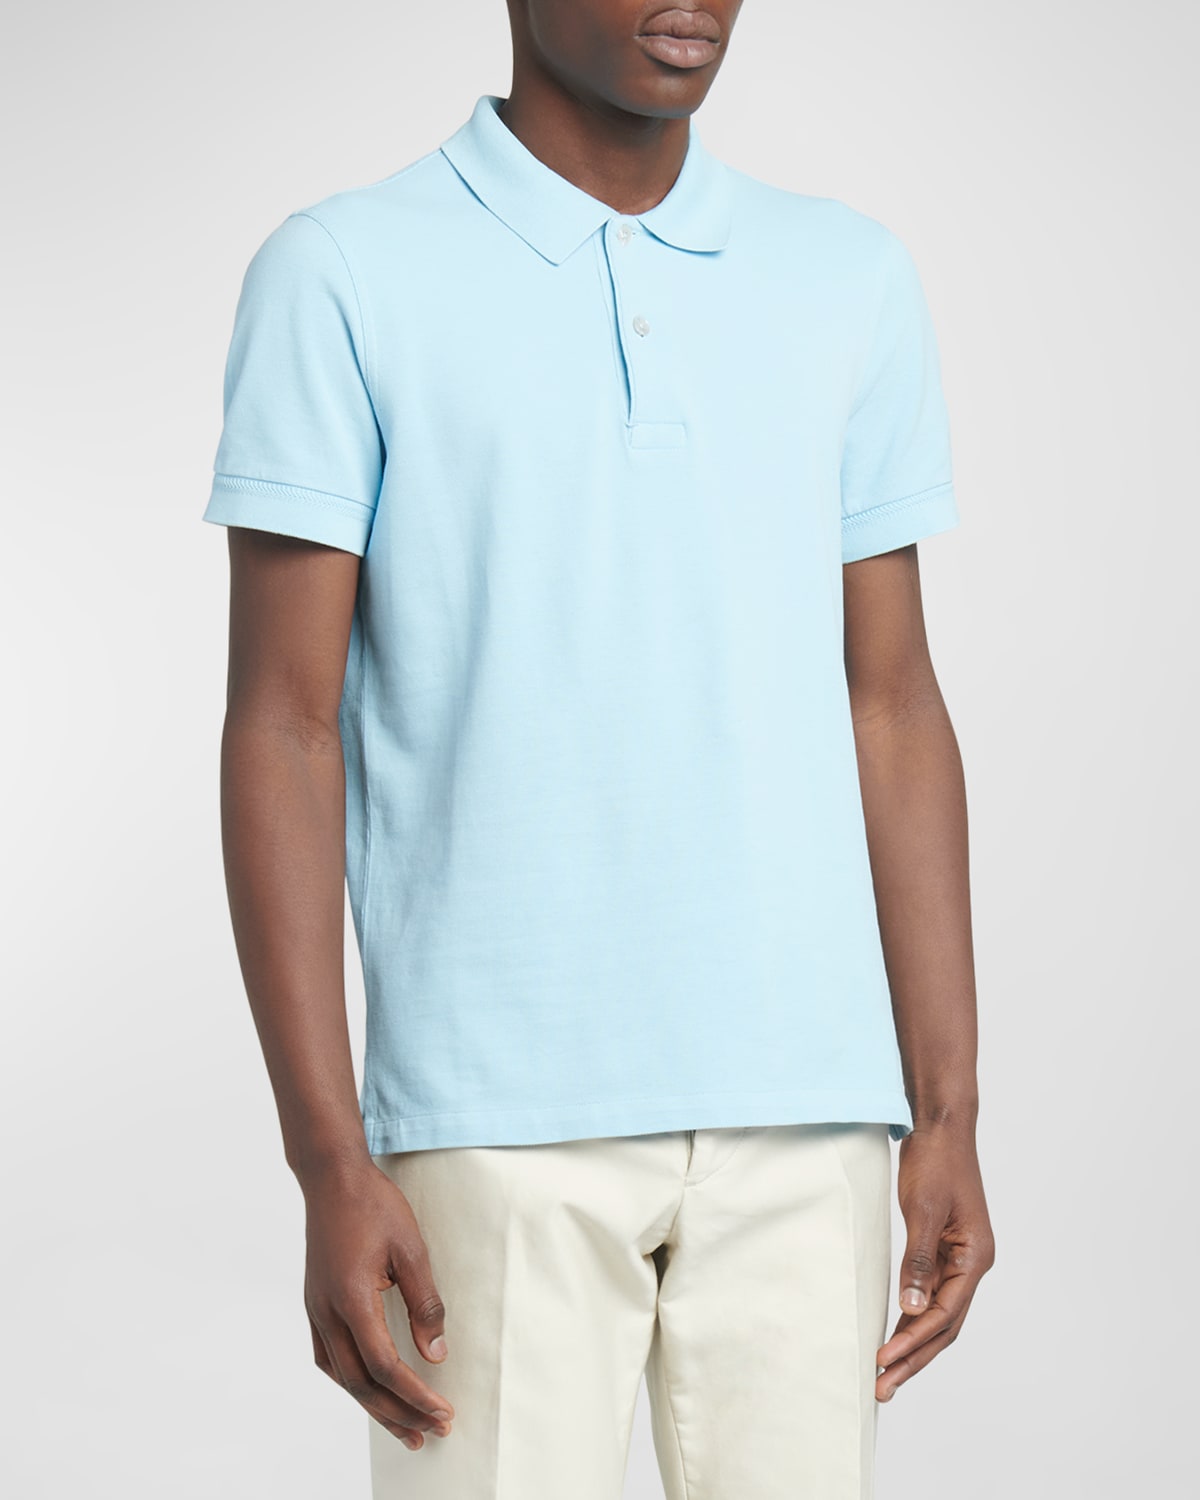 Tom Ford Toweling Cotton Blend Polo Shirt In Sky Blue